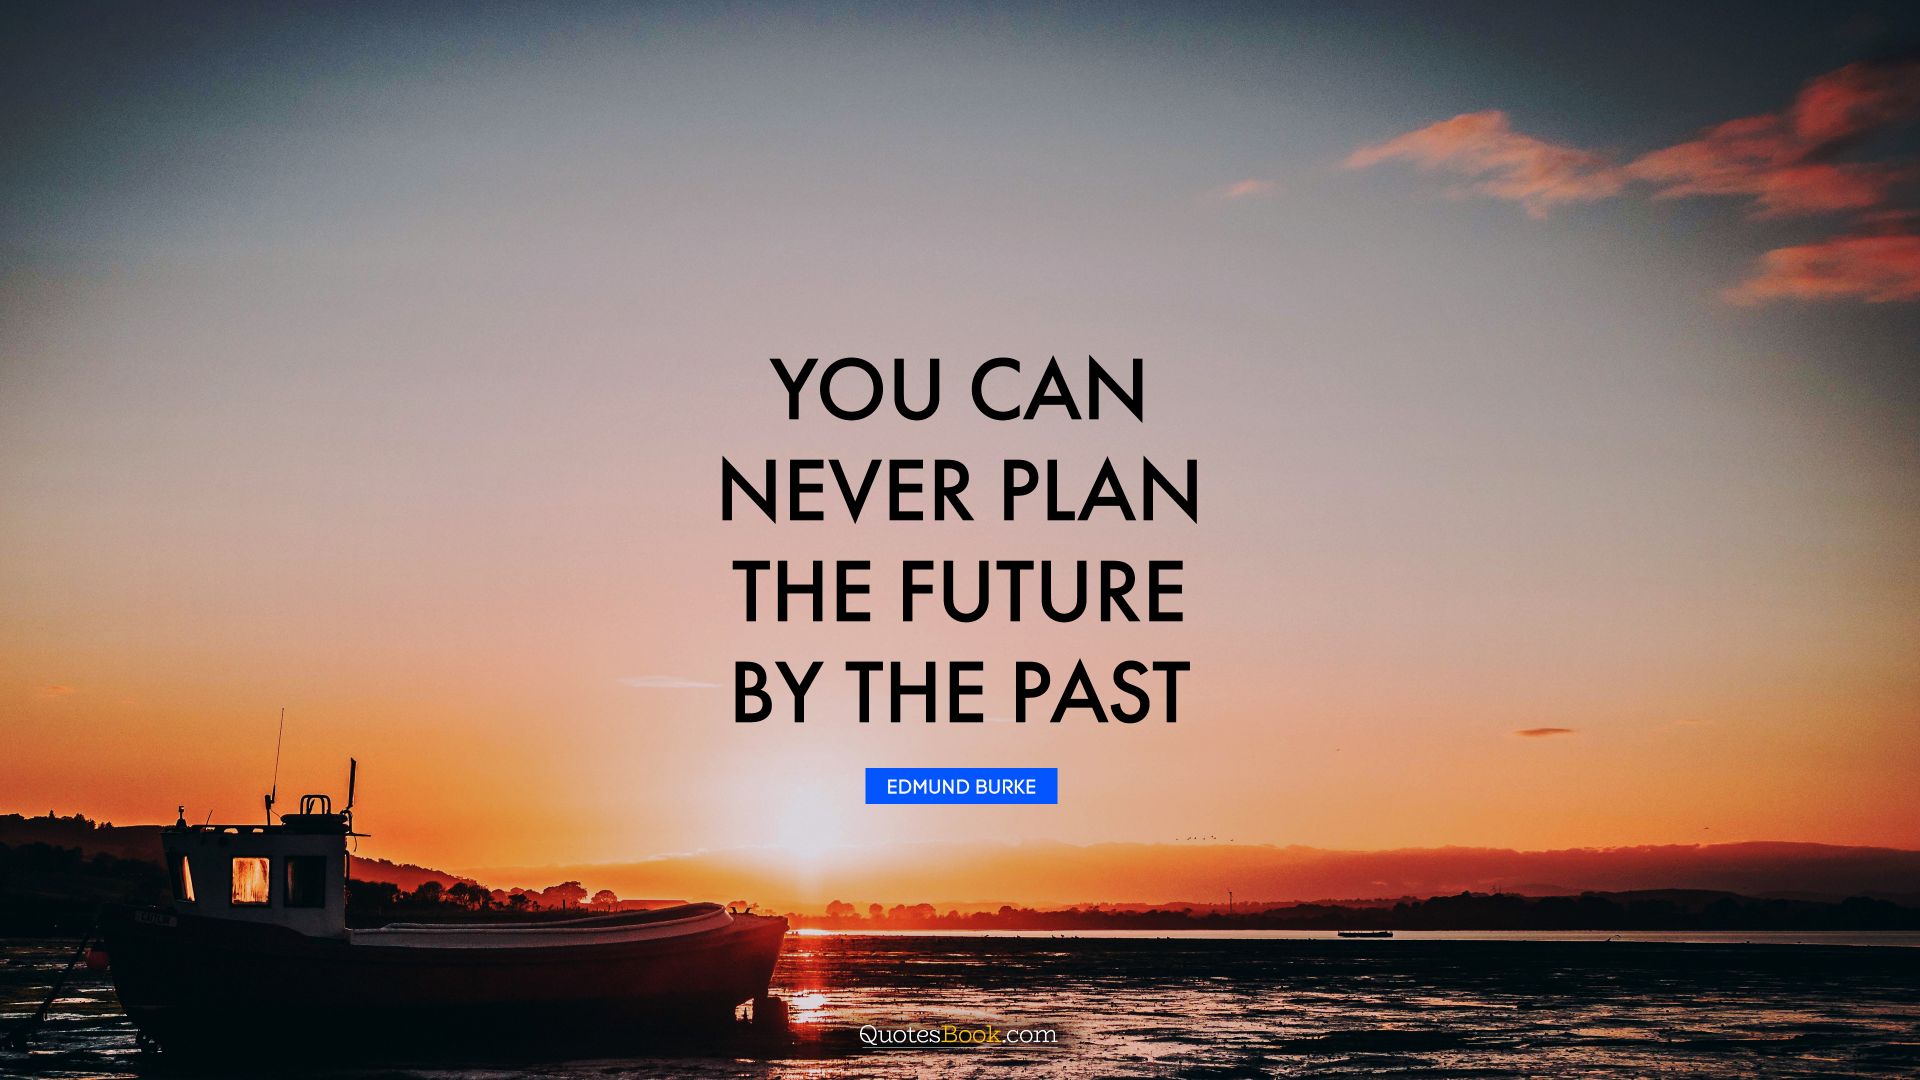 You can never plan the future by the past. - Quote by Edmund Burke